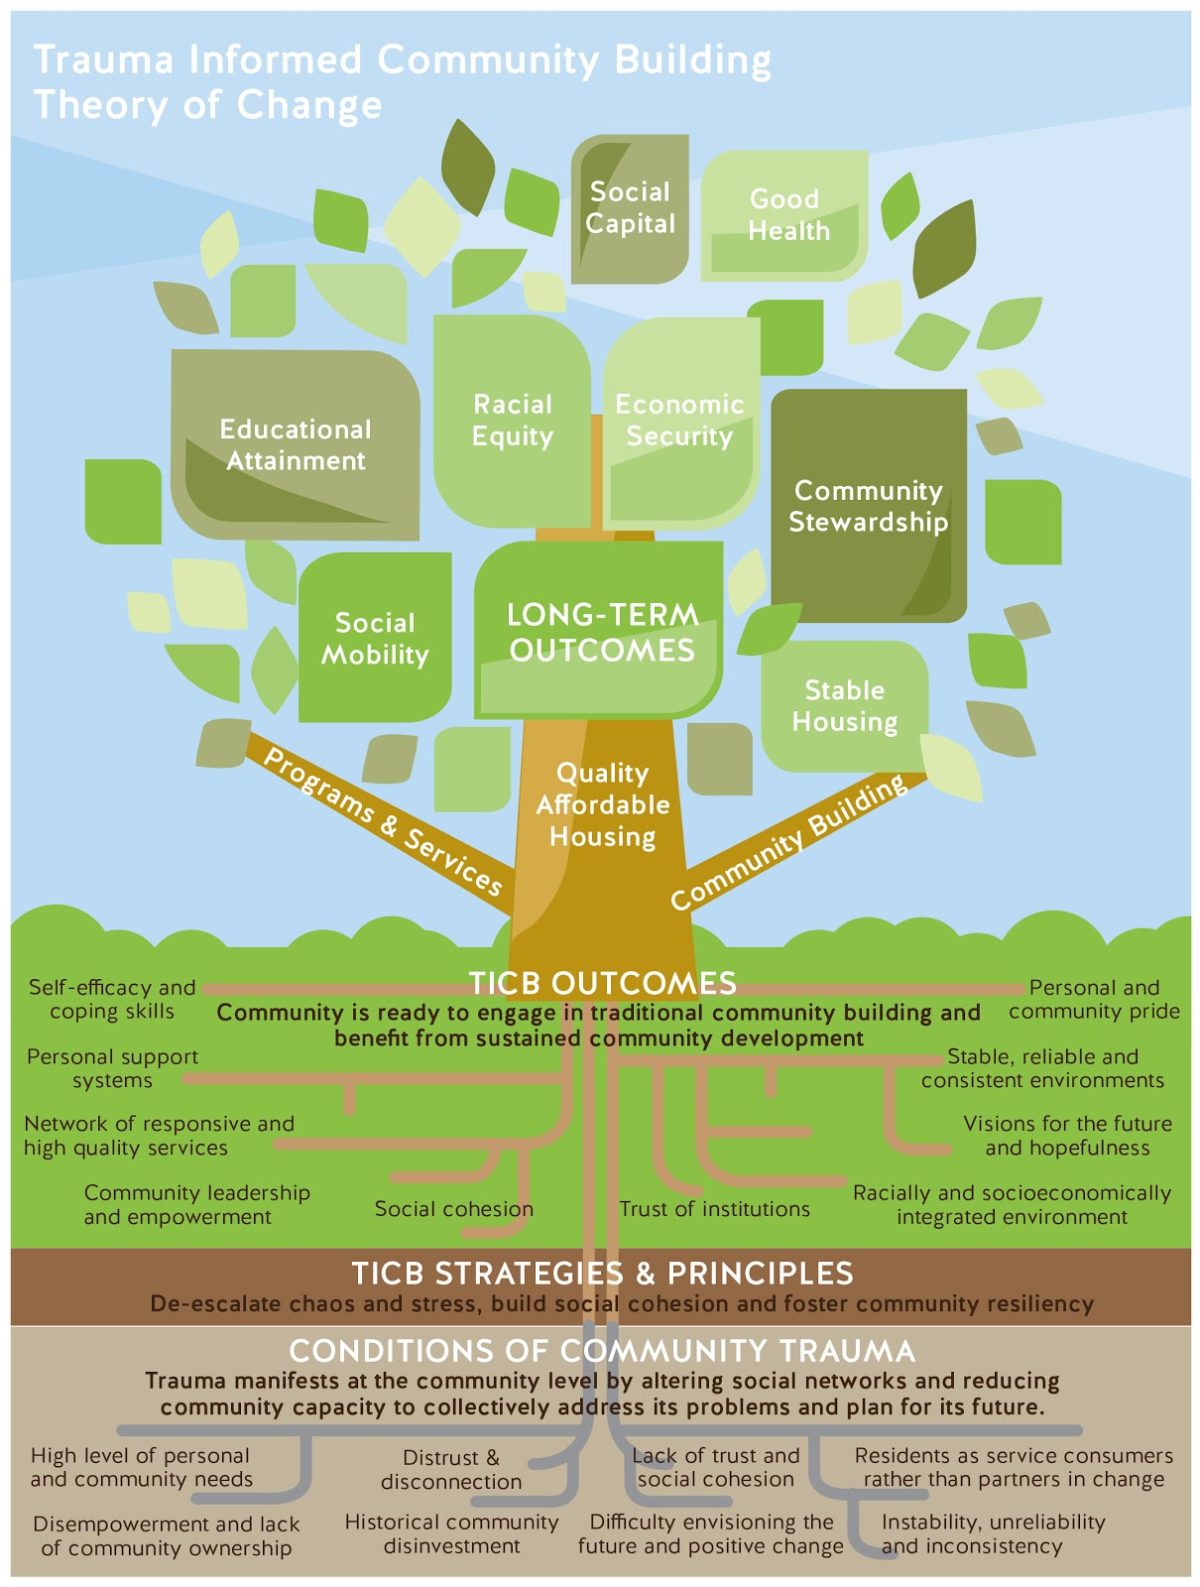 This illustration of Trauma Informed Community Building theory of change shows “how the short-term impacts of the Trauma Informed Community Building principles and strategies provide the fertilizer to grow a healthy community development tree.”